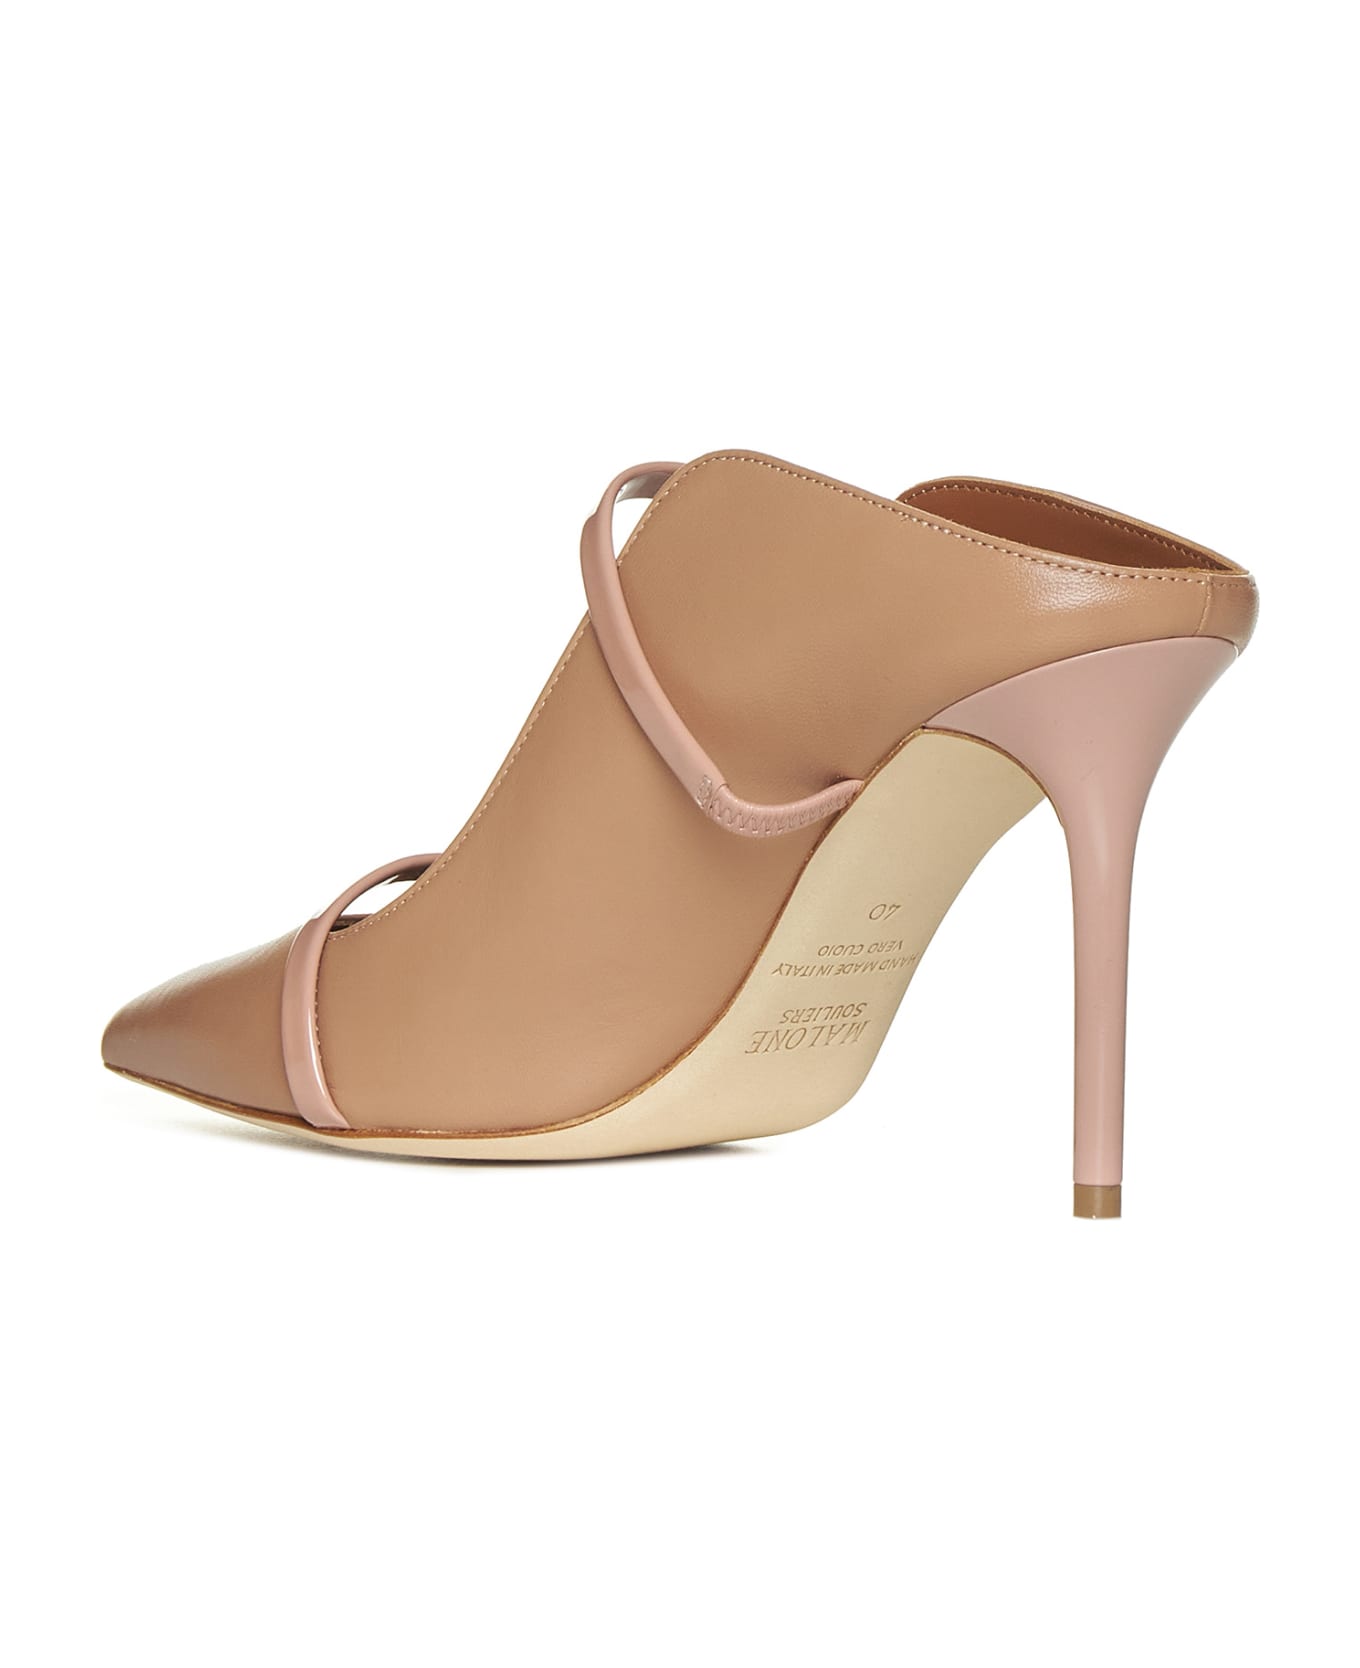 Malone Souliers Sandals - Nude/blush nud